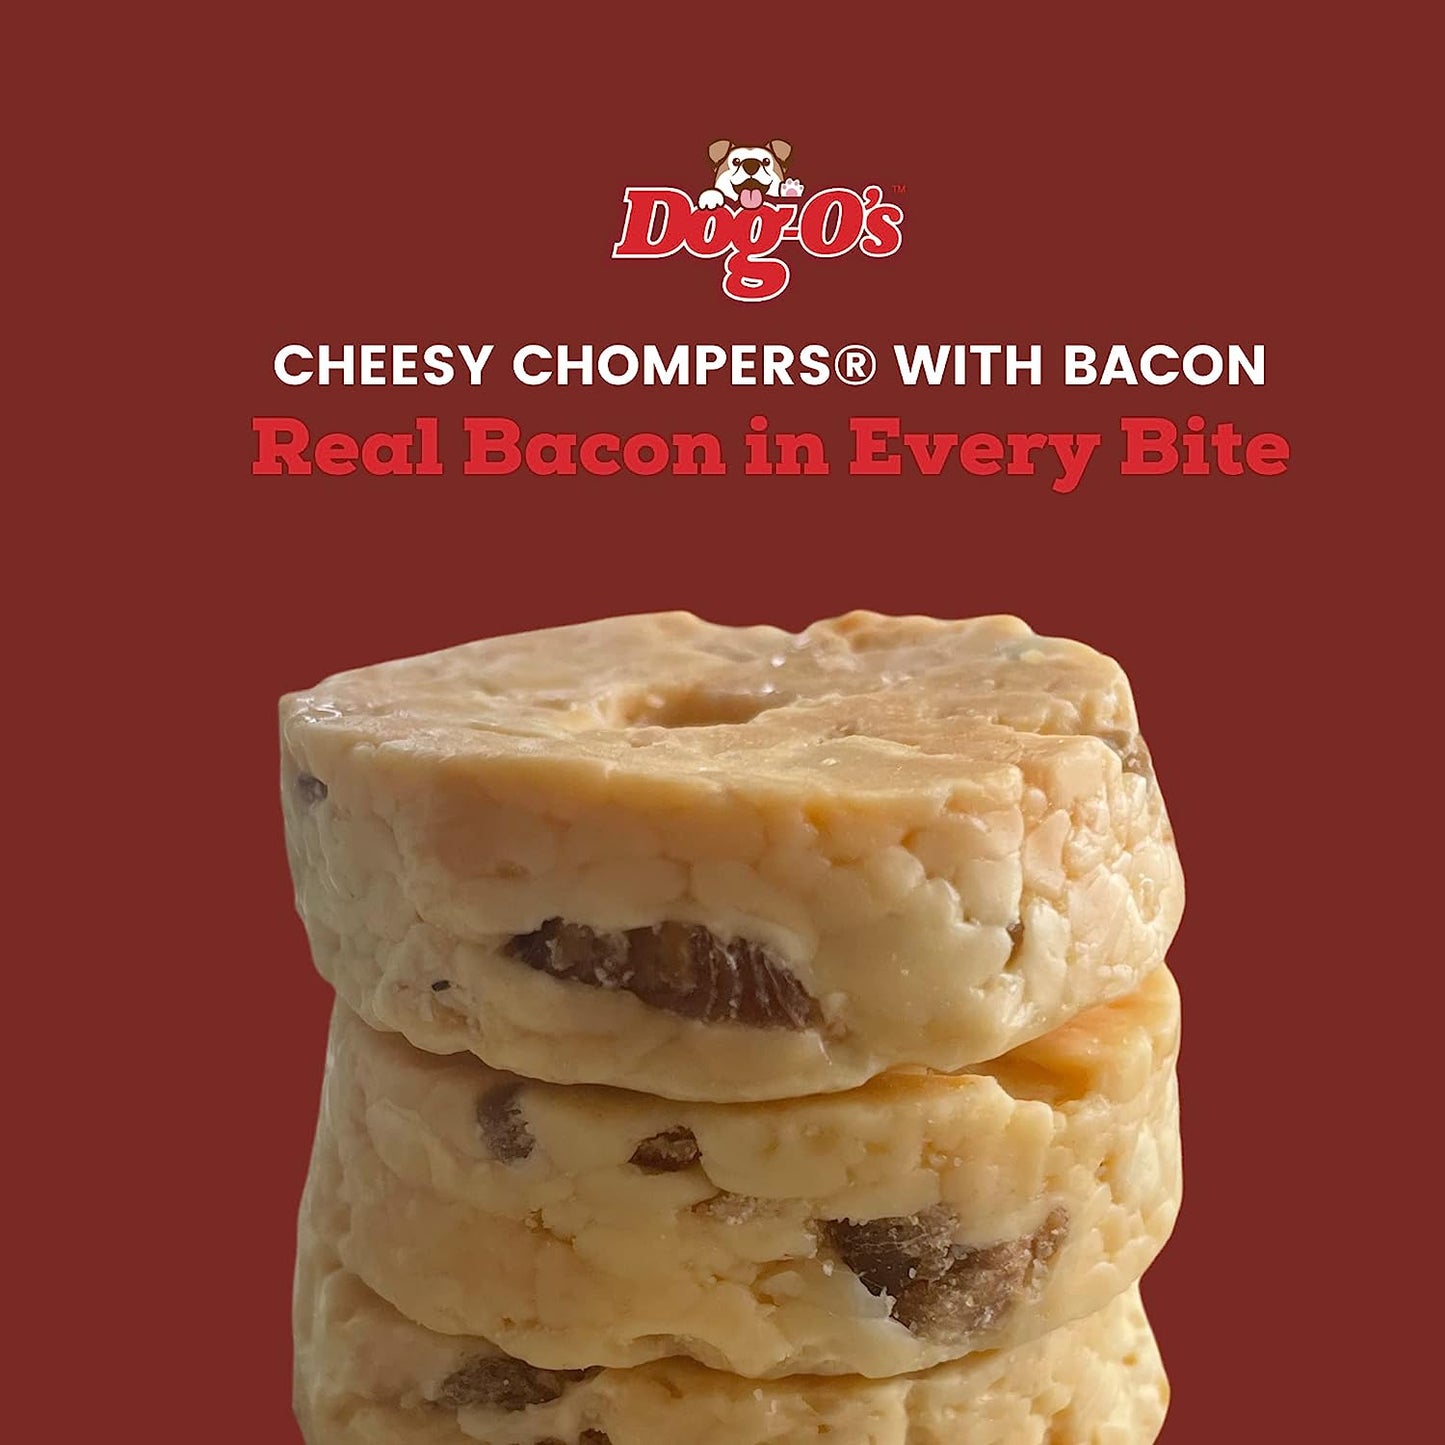 DOGOS CHEESE CHOMPERS BACON LG